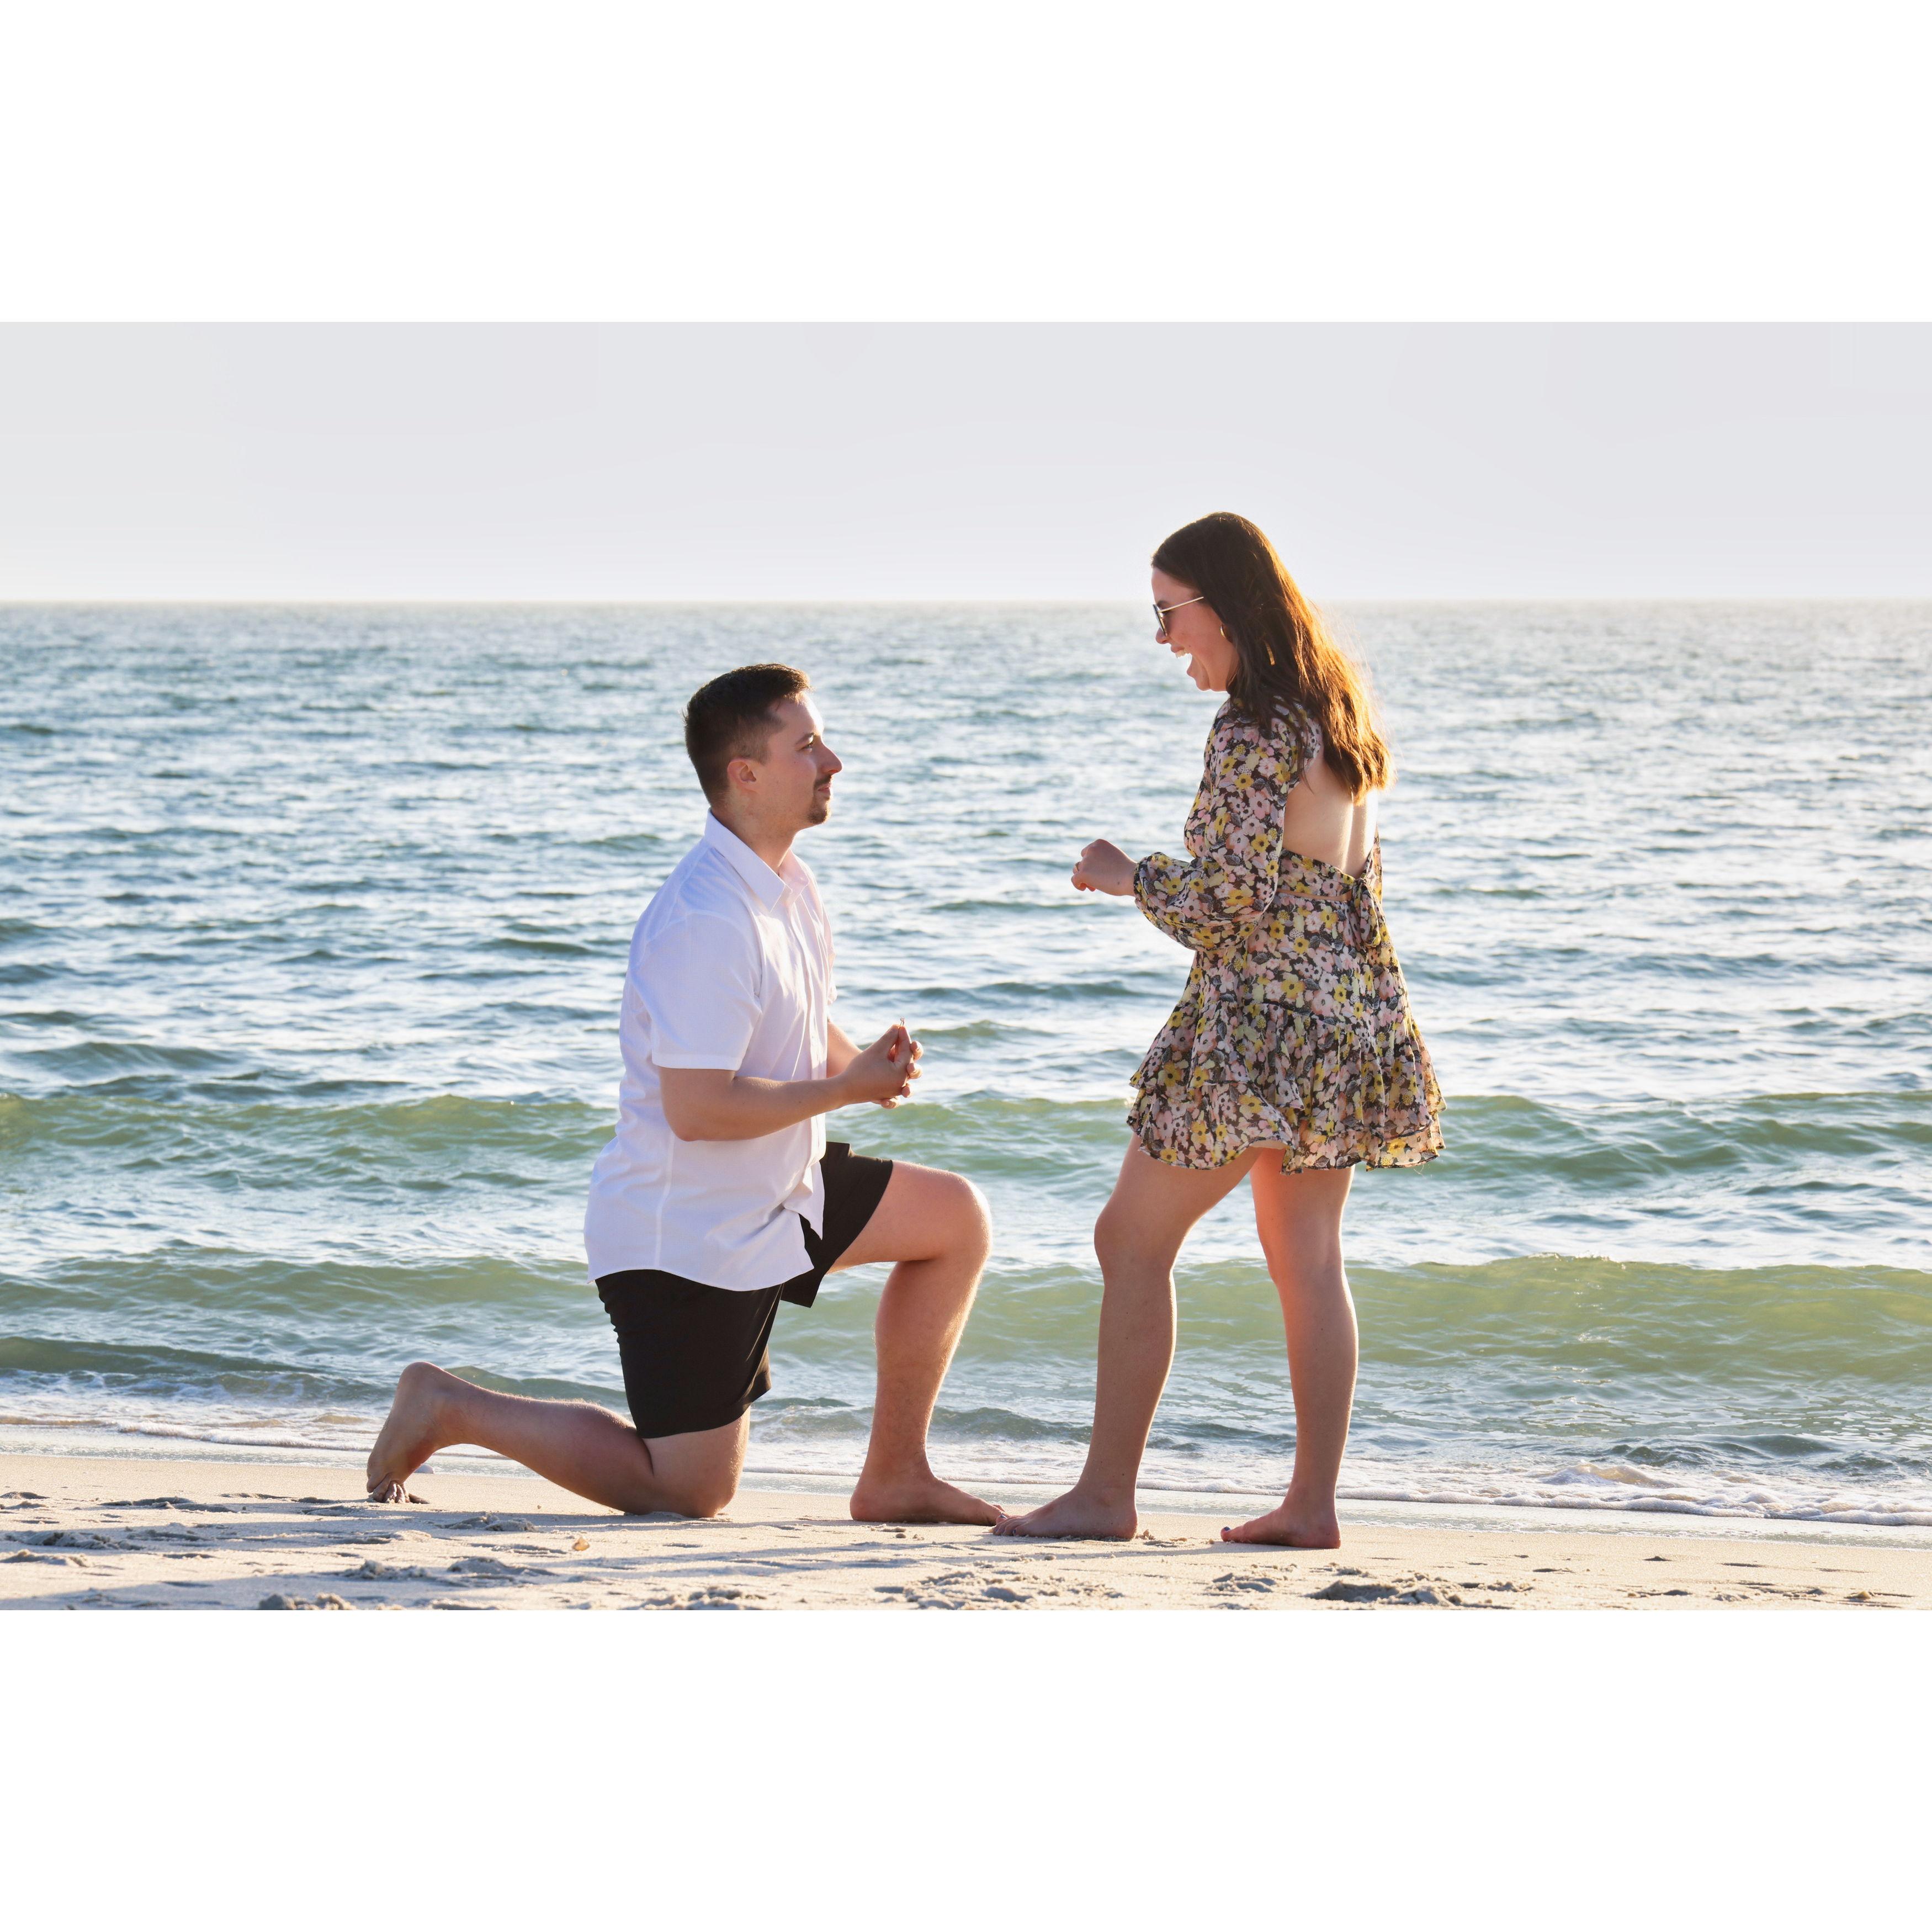 Tylar planned a perfect proposal, he even had a photographer hidden on the beach with a beautiful bouquet of flowers